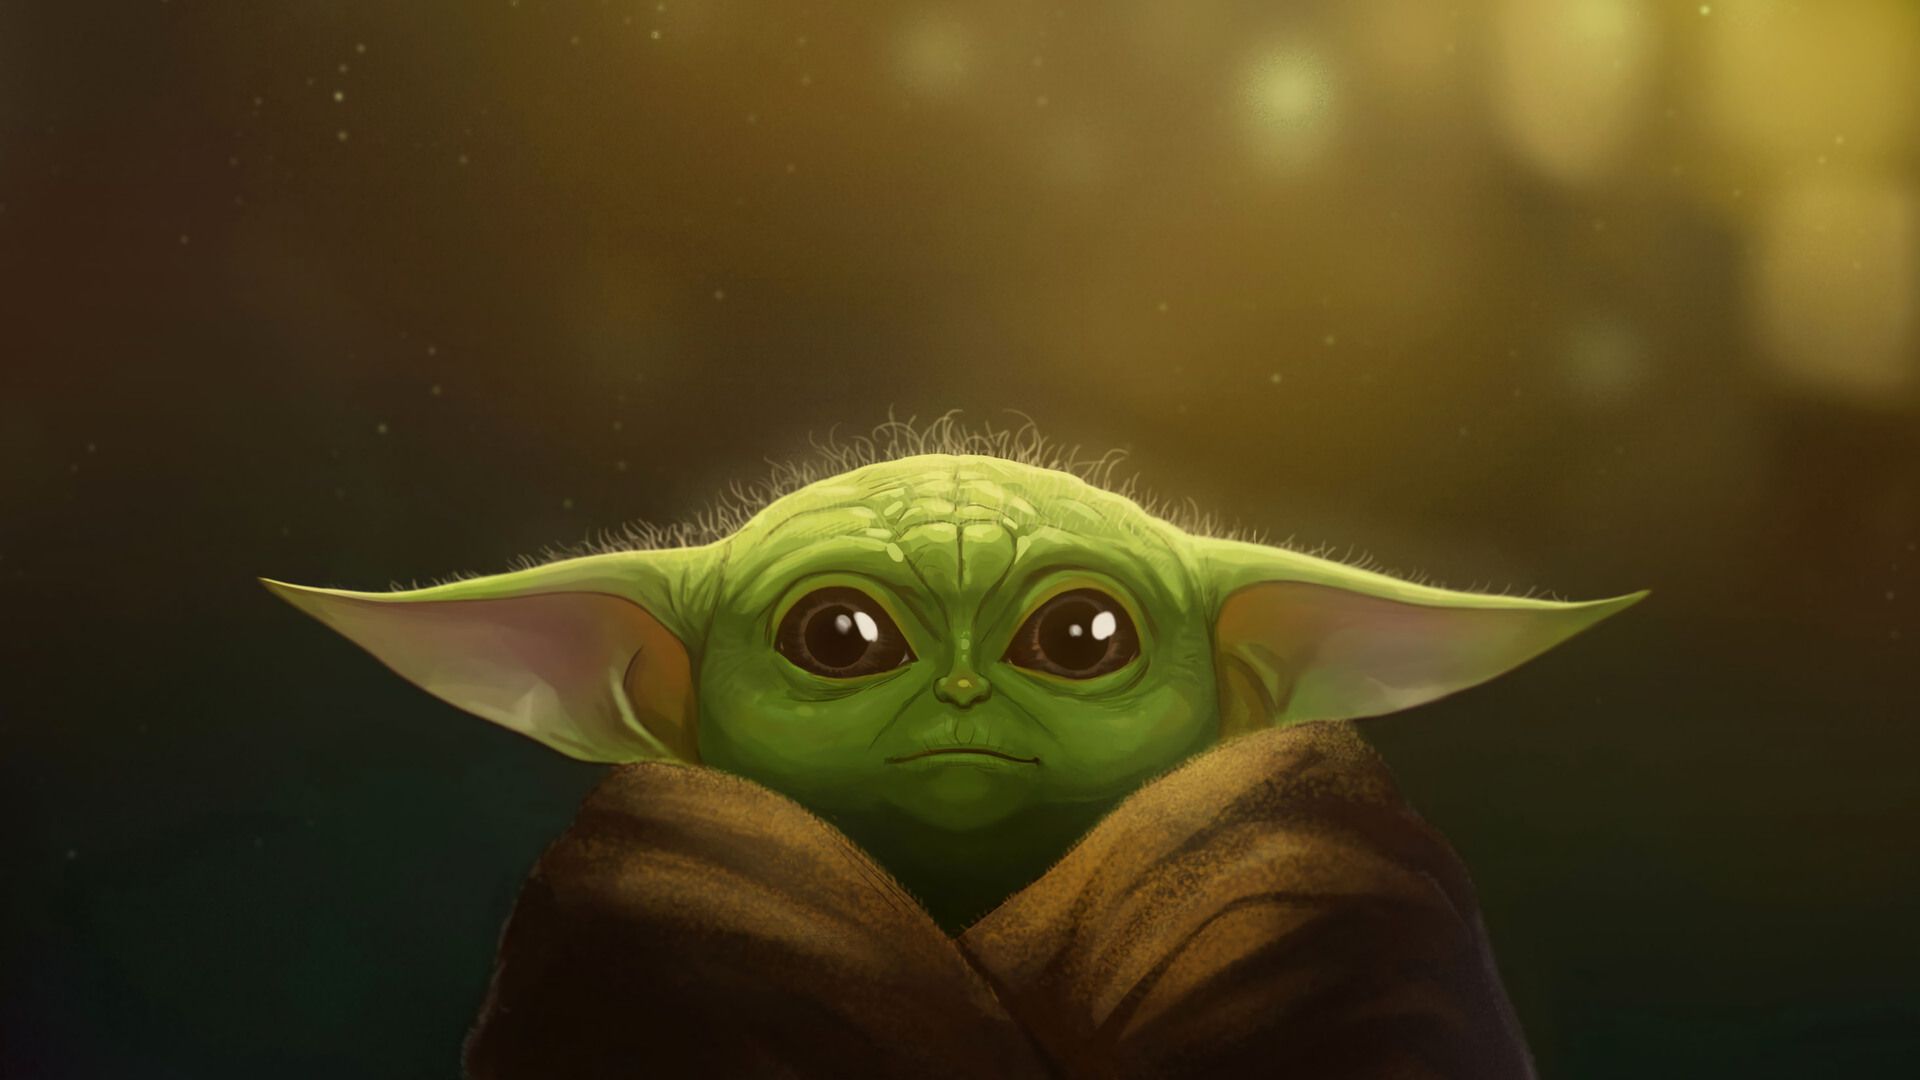 Conquering The World It Is, Baby Yoda! All Details About Baby Yoda + HD Wallpaper